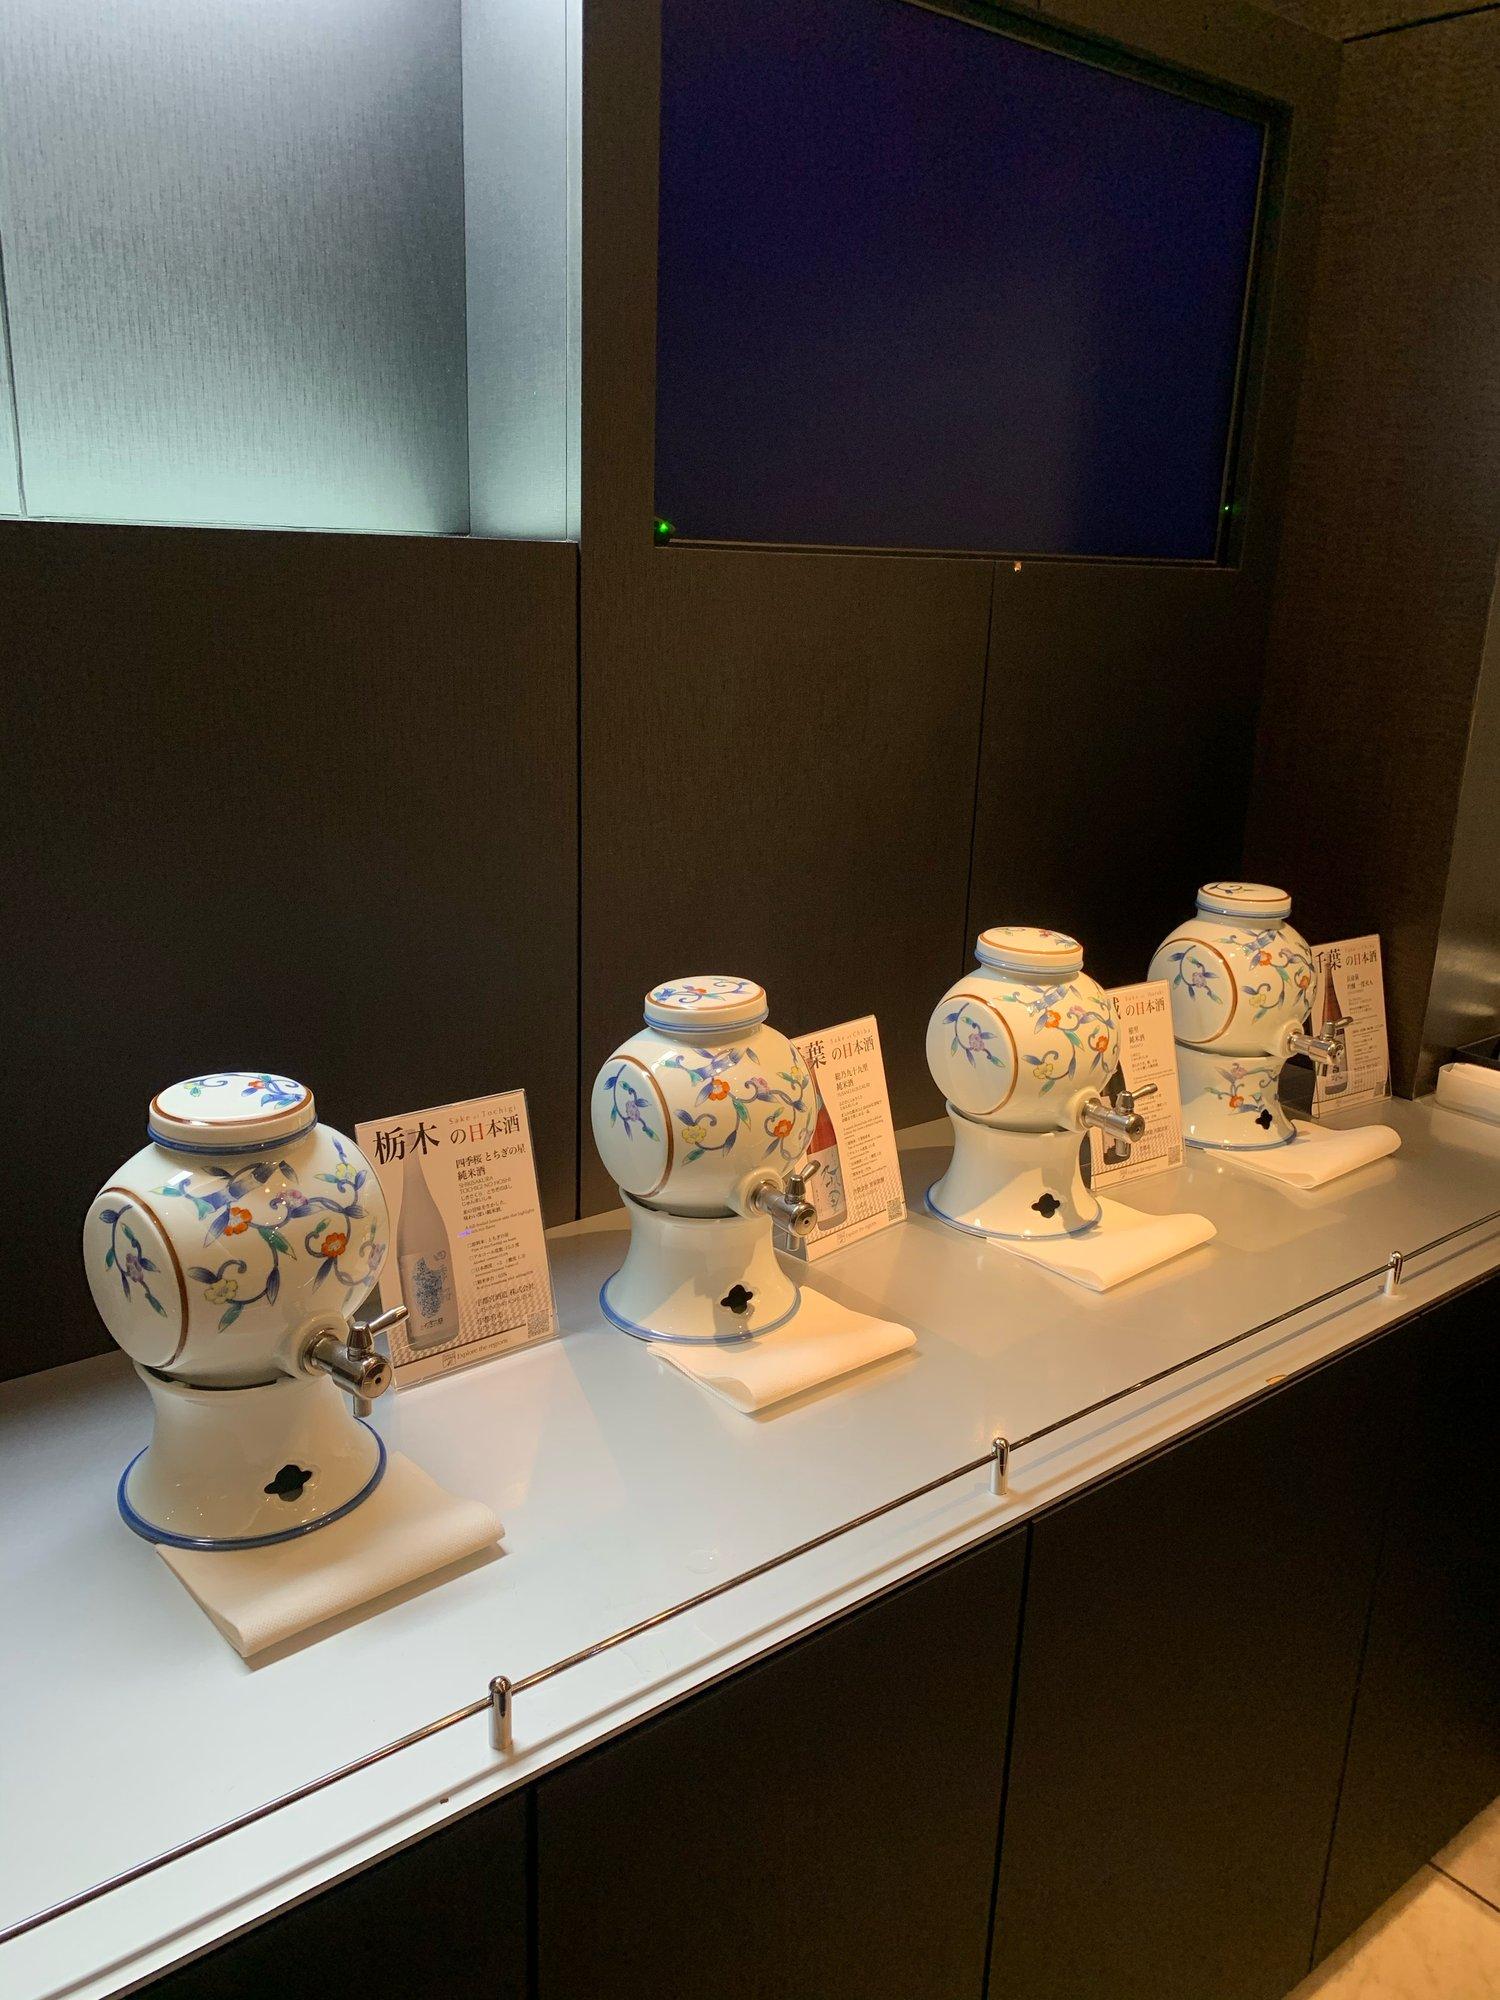 All Nippon Airways ANA Lounge image 39 of 39